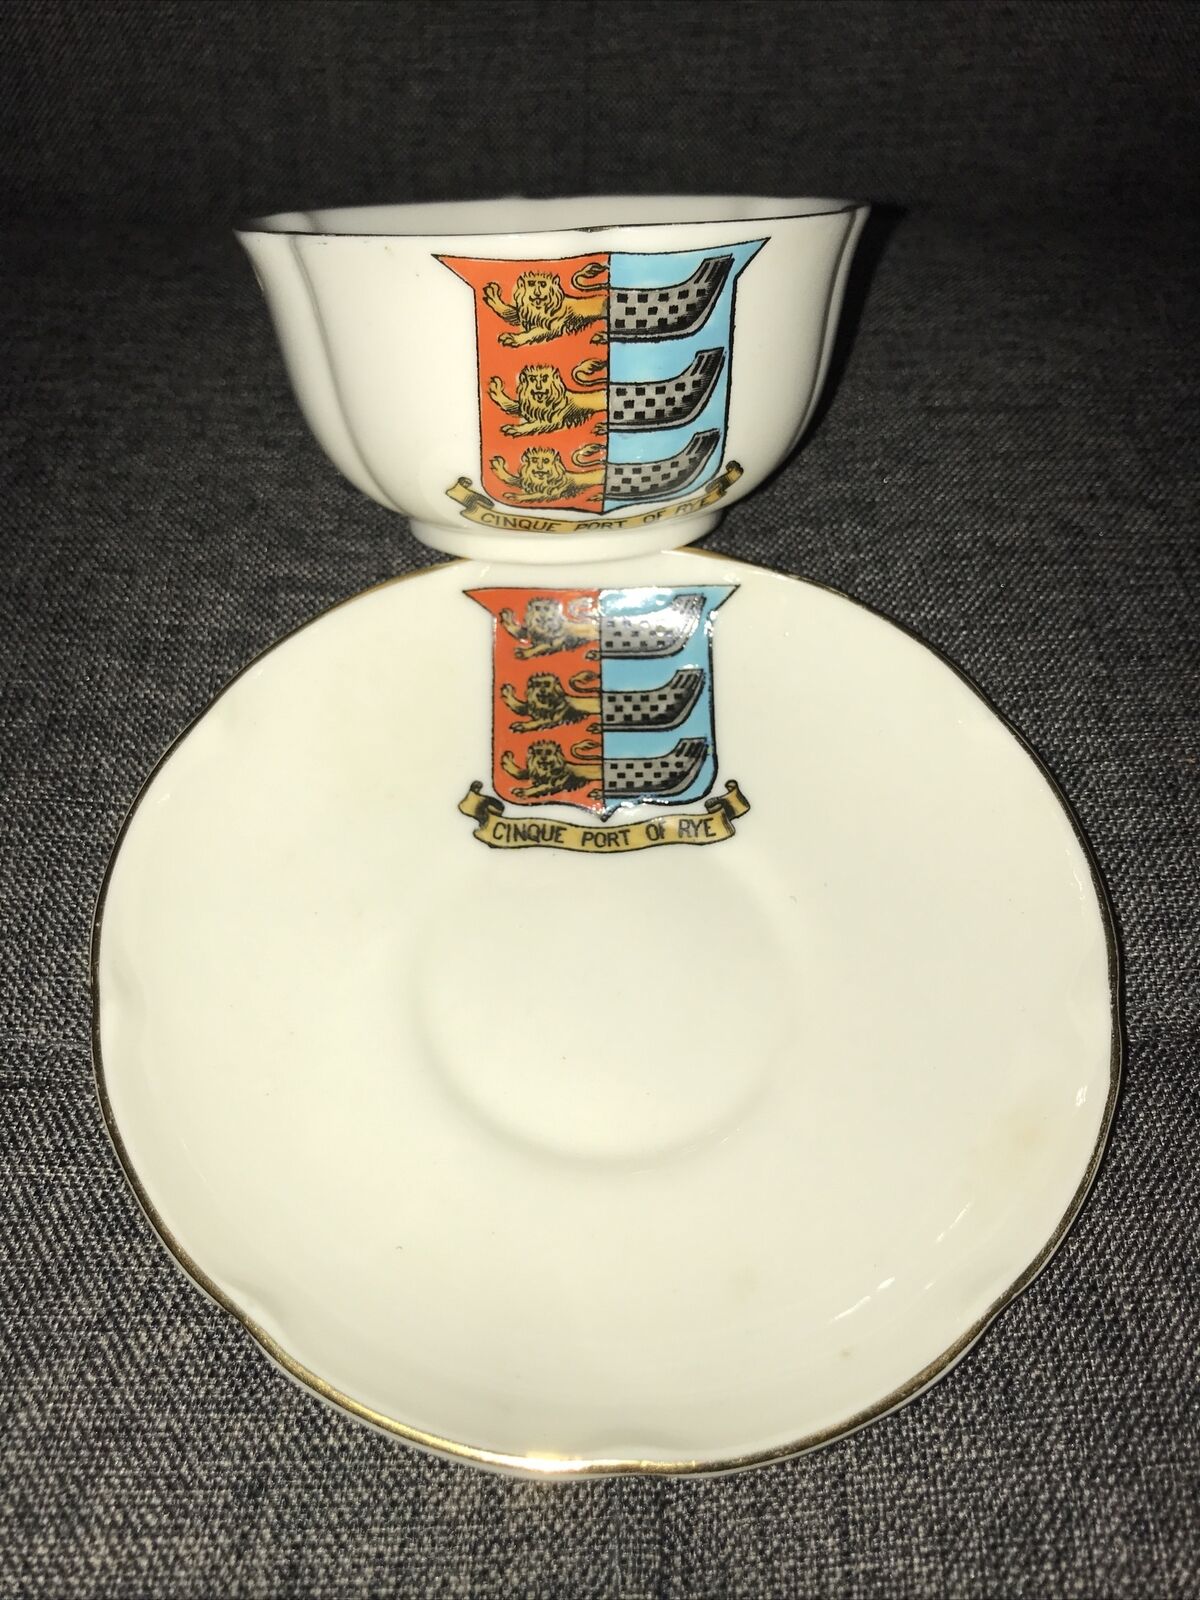 W. H. Goss, Port Of Rye, Teacup And Saucer, Rare Vintage China Cup